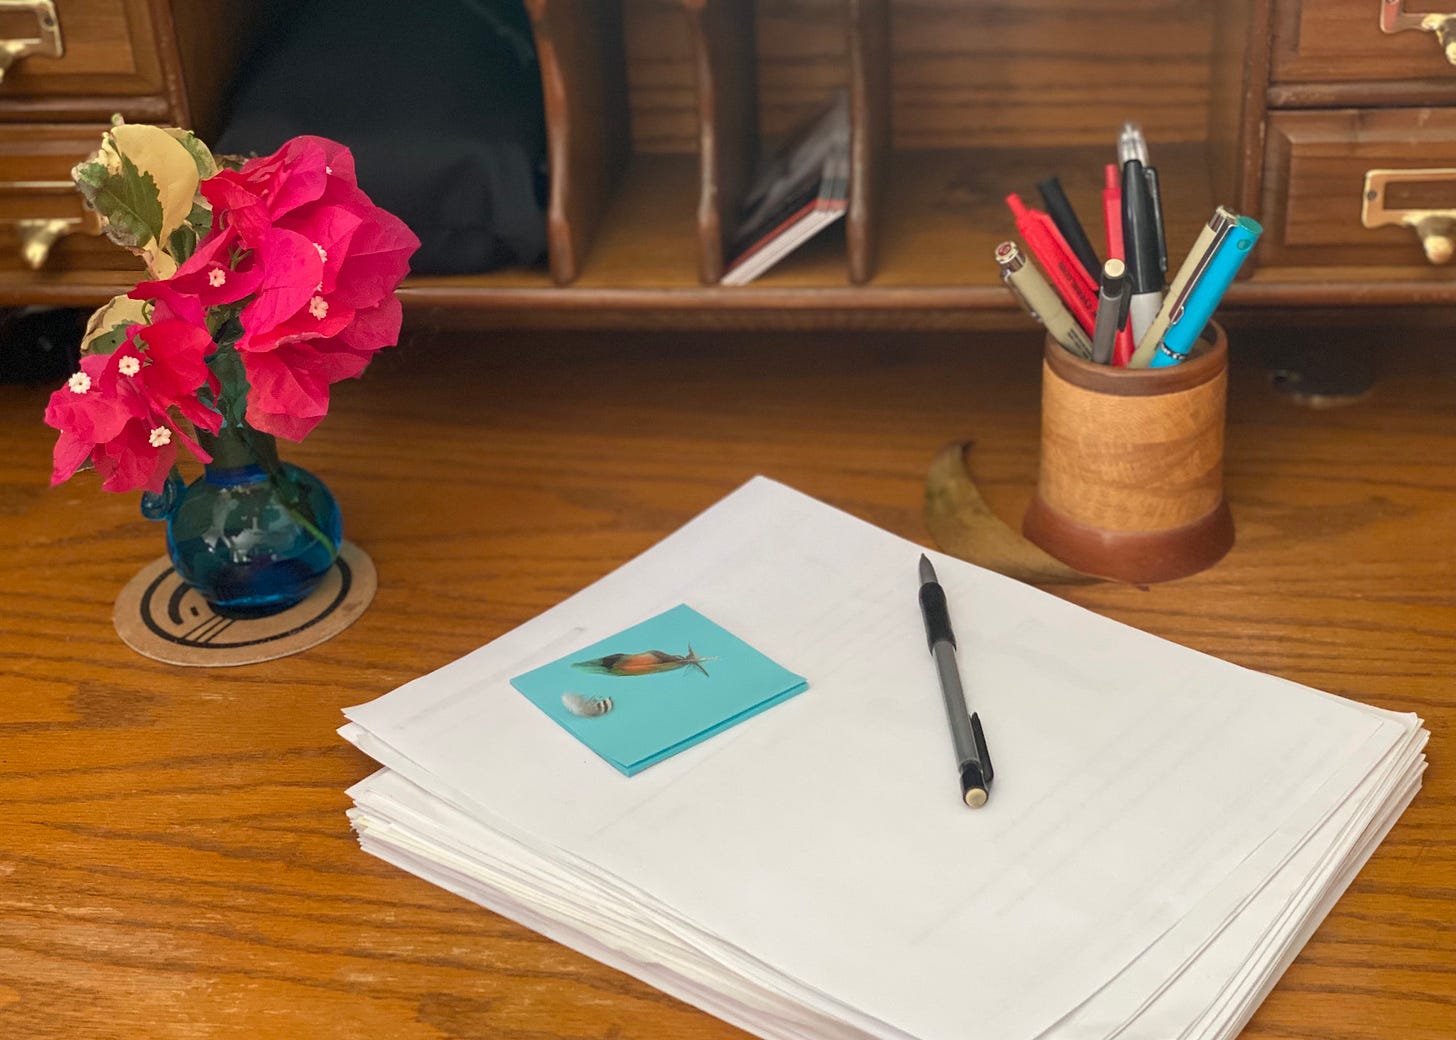 A sheaf of manuscript pages on a wooden desk with pencil, vase of flowers, and a round carved wooden pen and pencil holder. On the sheaf of papers is a nearly used-up stack of Post-It notes and two tiny feathers